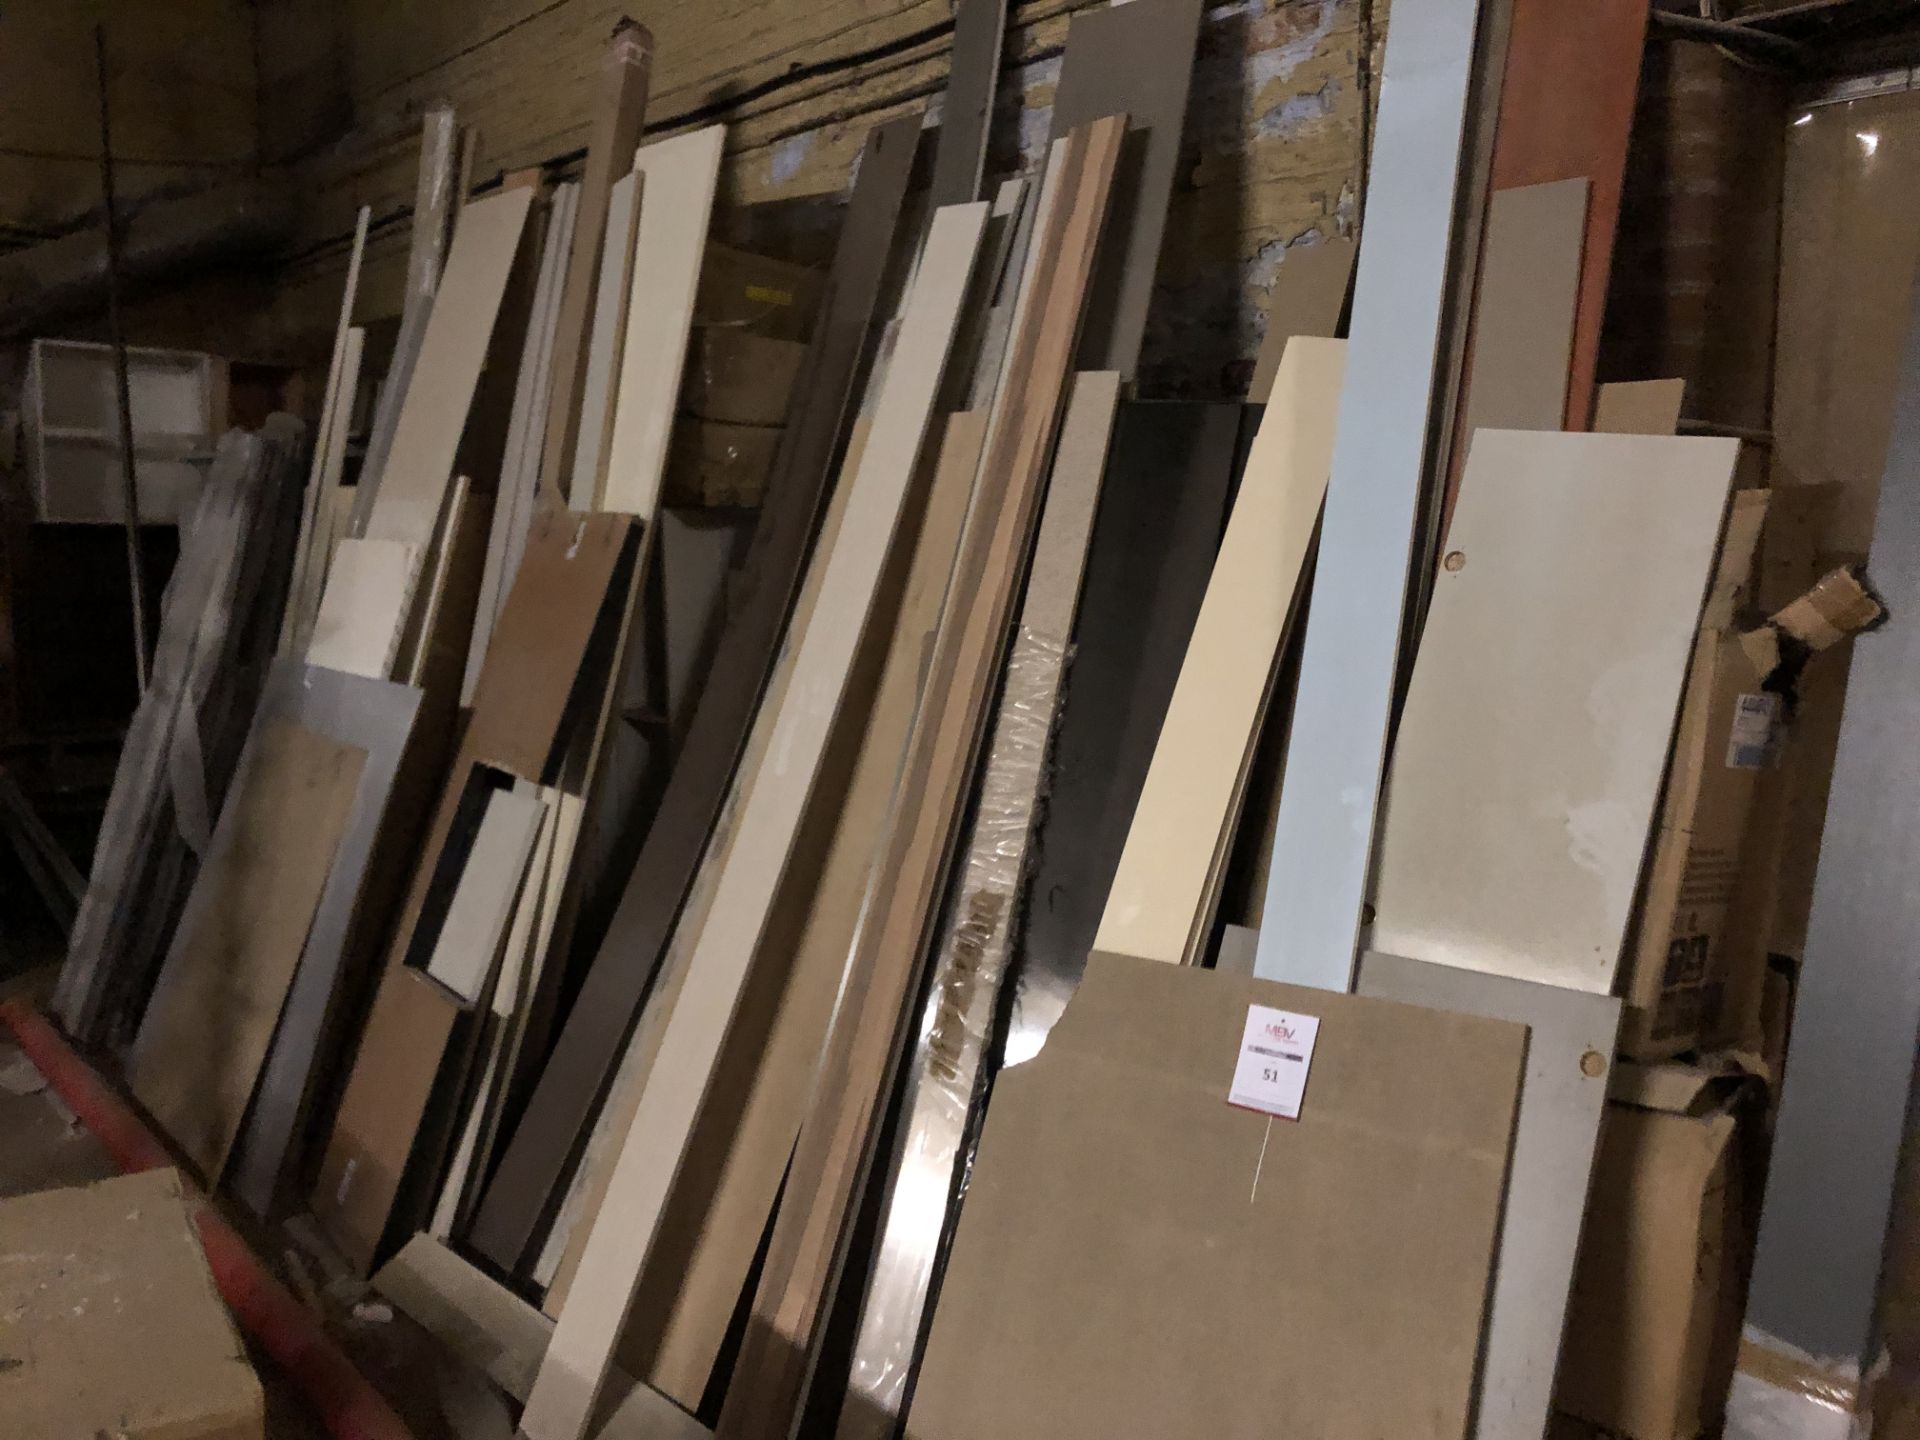 Quantity of Assorted Laminated Panels and Kitchen Doors (as photographed).